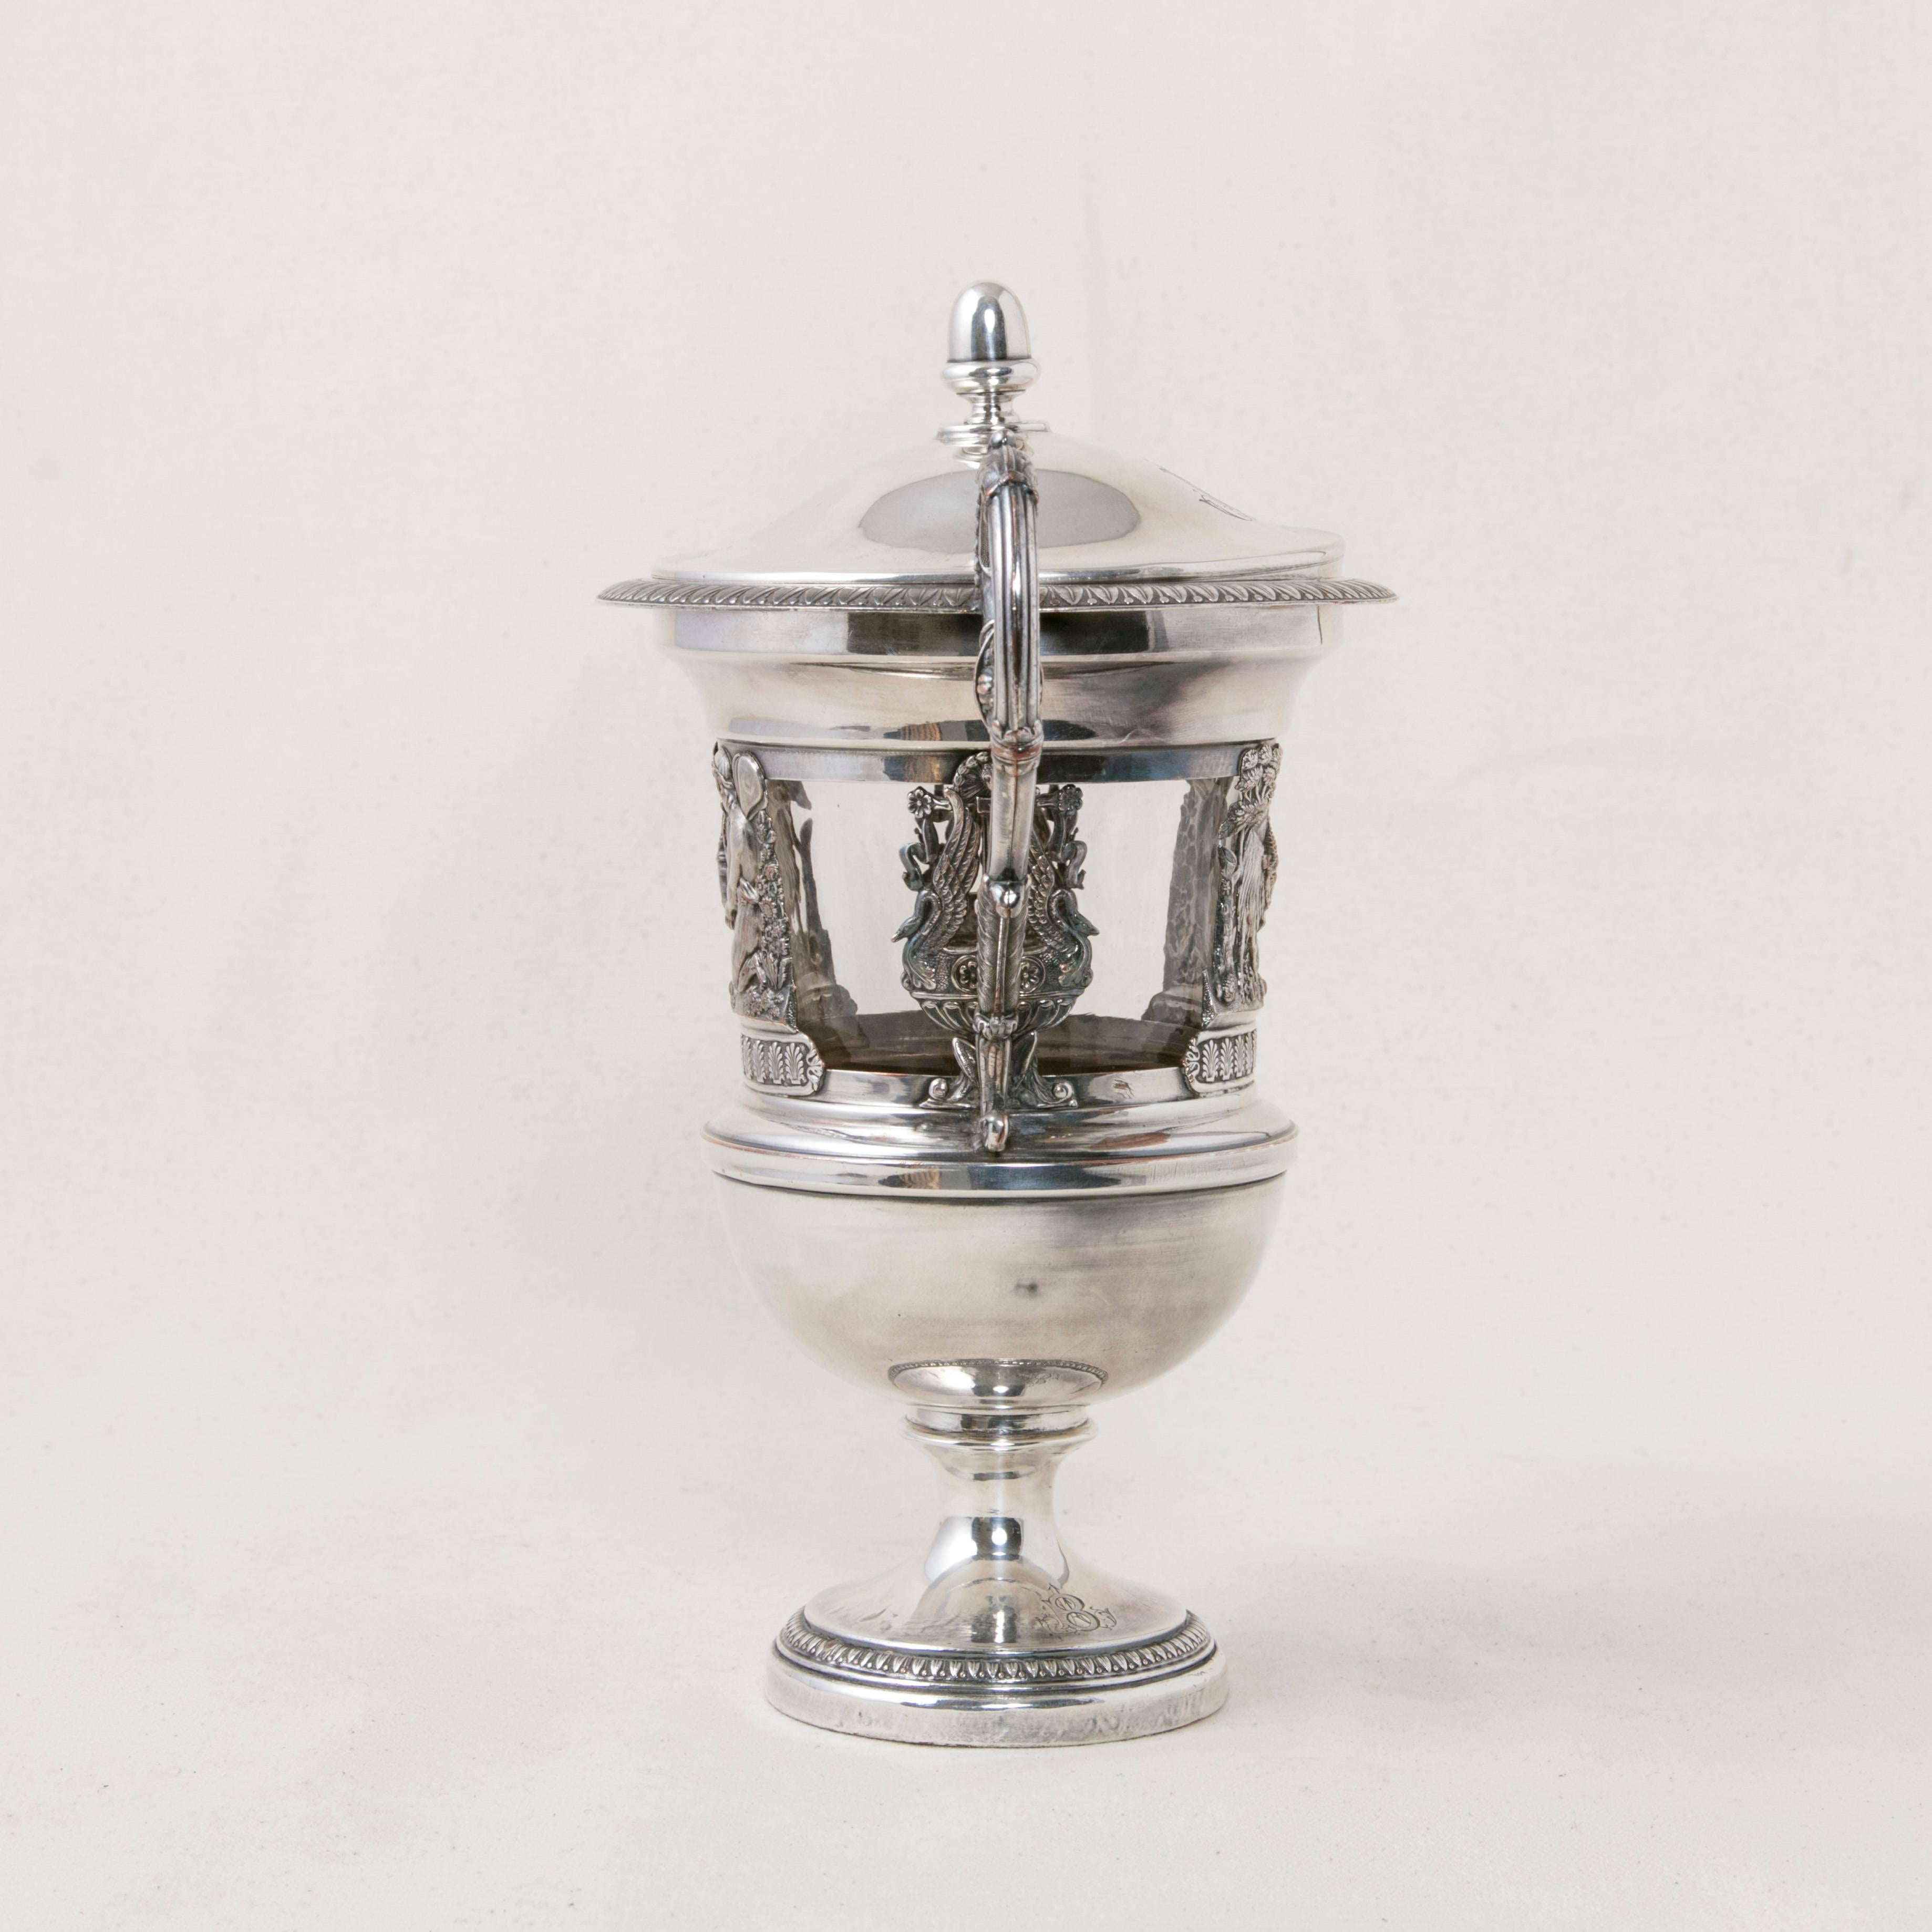 French 19th Century, English Silver Plate Serving Piece or Urn with Crystal Insert